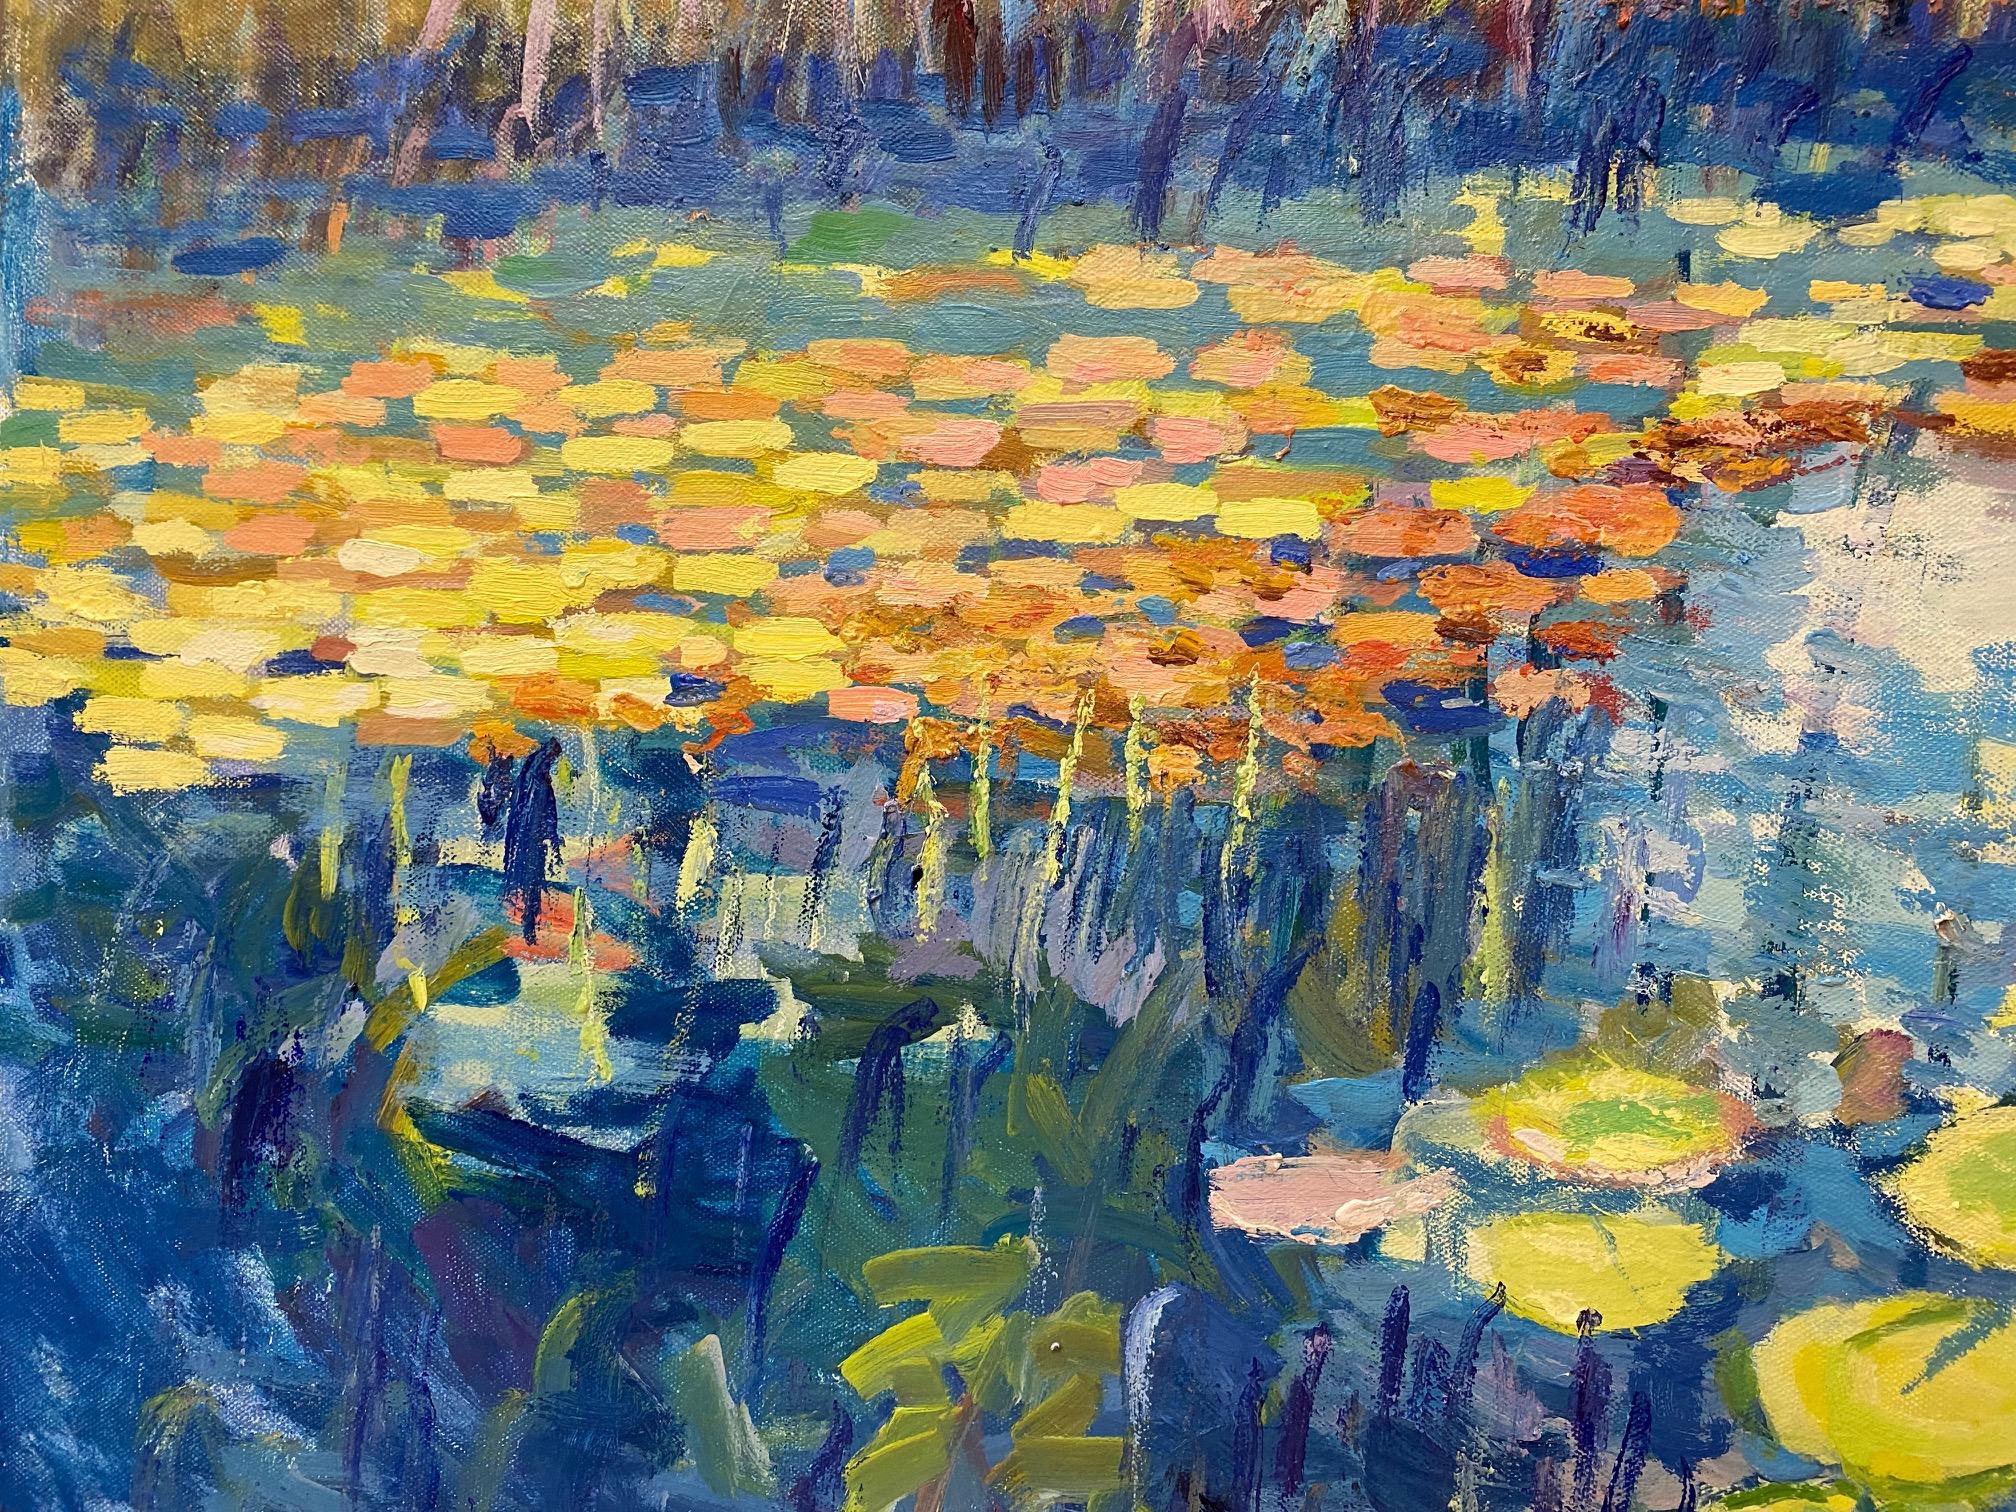 Remembering Candyland where everything sparkles in an irresistibly delicious way, and inspires you to proceed forward to the next adventure, the floral reflections in the pond multiply the magic charm of this French impressionist original oil